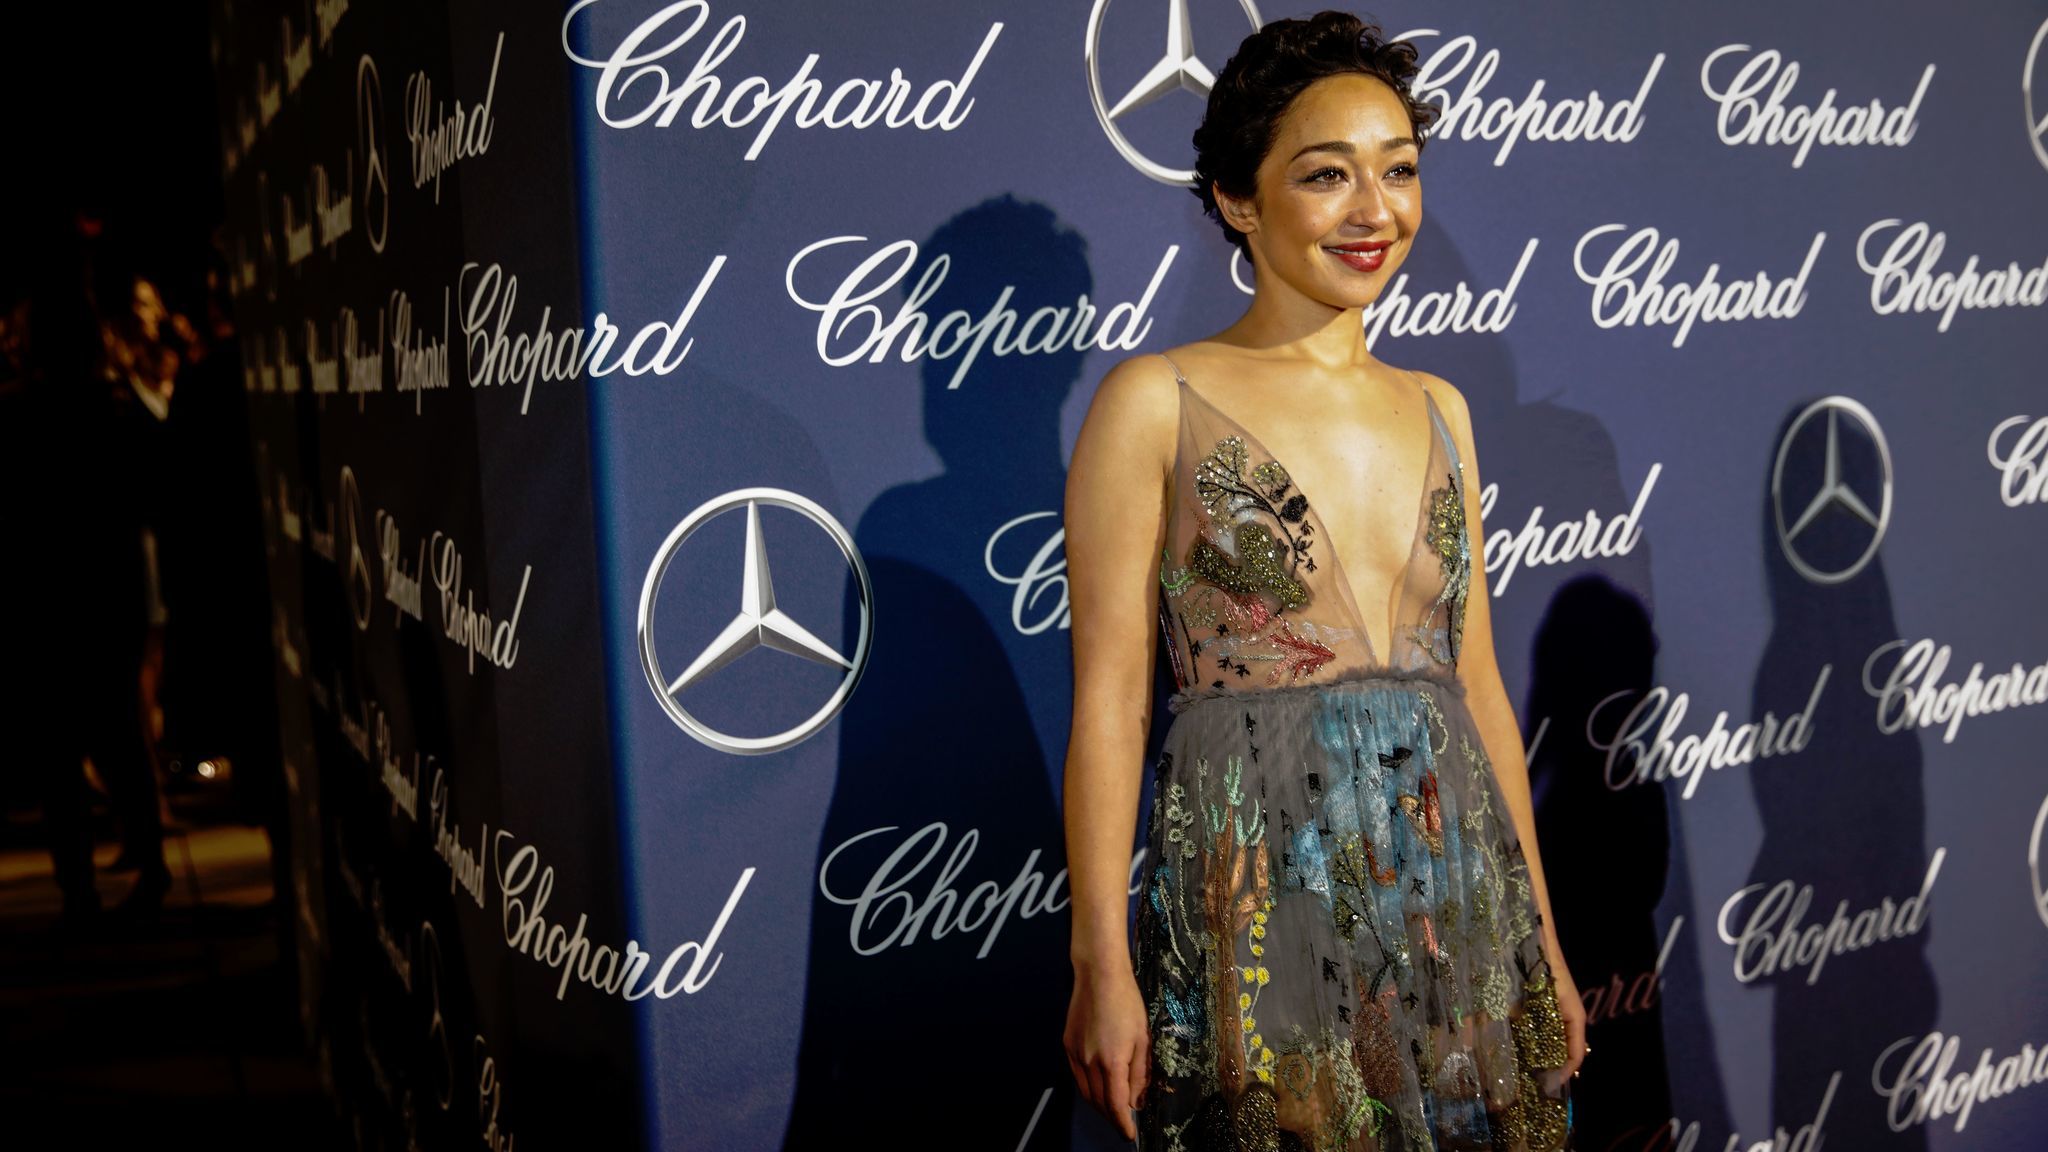 She not only won the Rising Star Award at the Palm Springs International Film Festival Awards Gala, but Negga also won raves for her exotic Valentino gown.